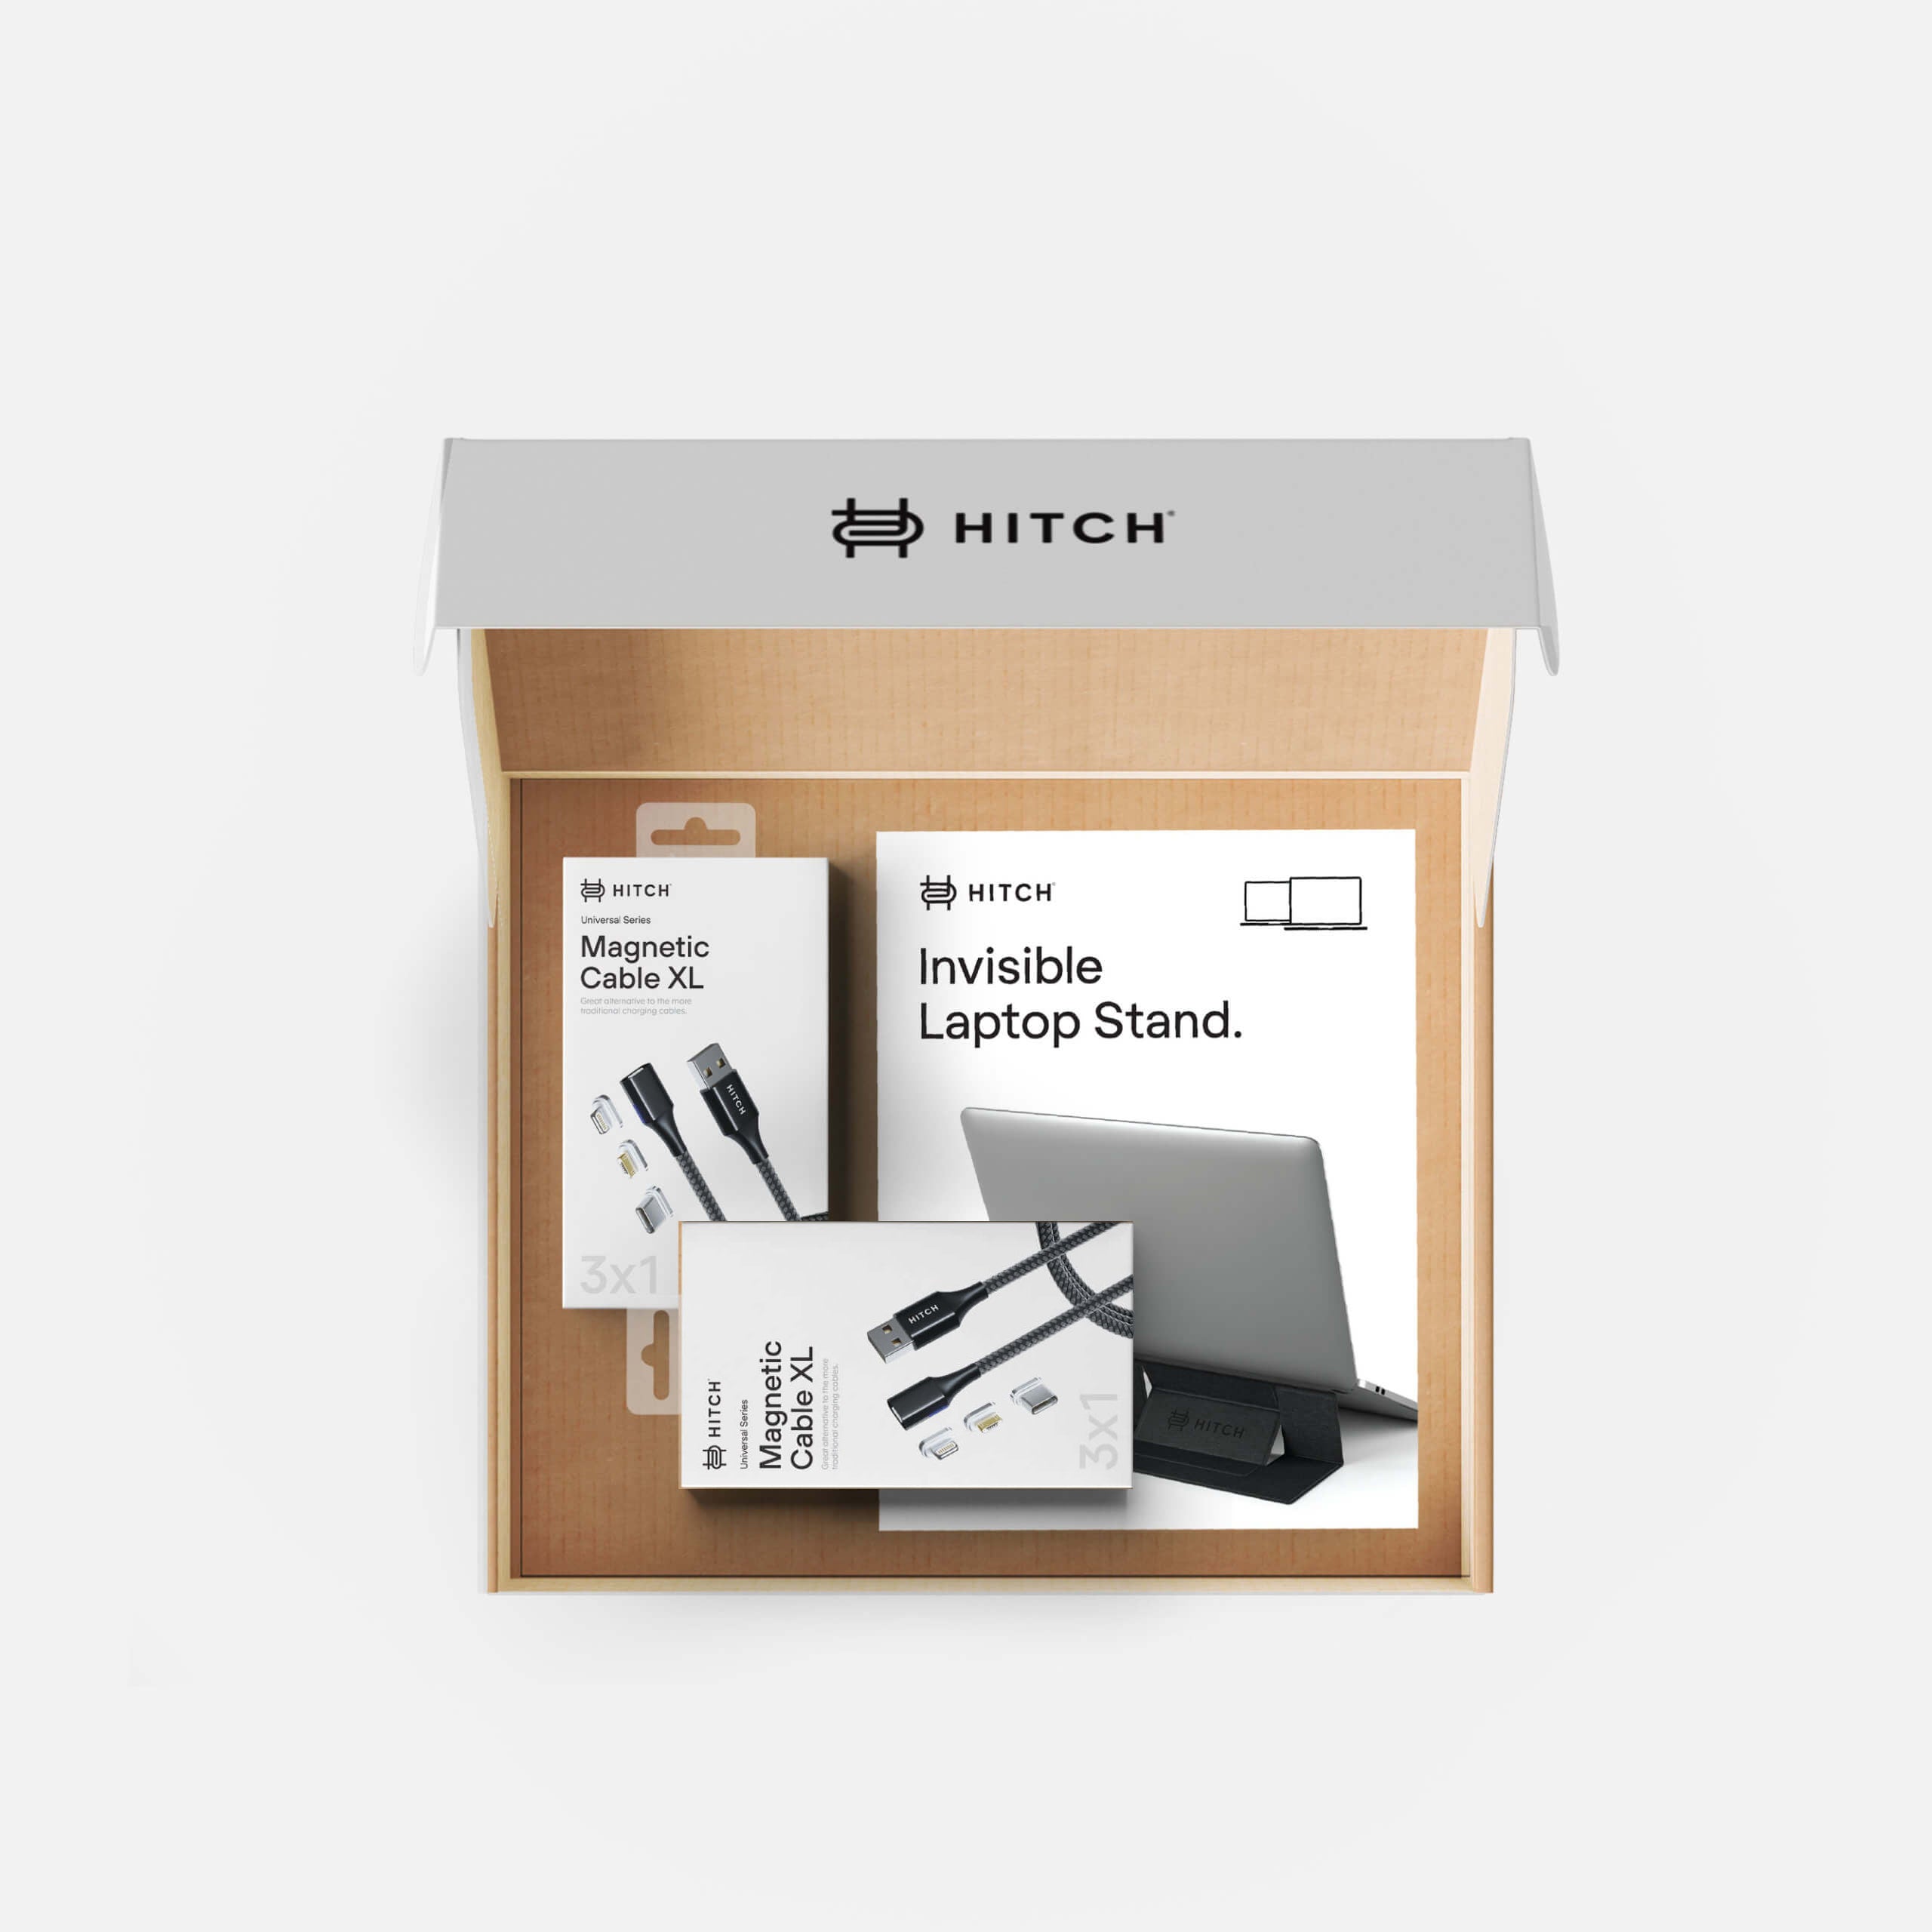 "Open HITCH brand packaging box with magnetic cable and invisible laptop stand inside, showcasing product design."